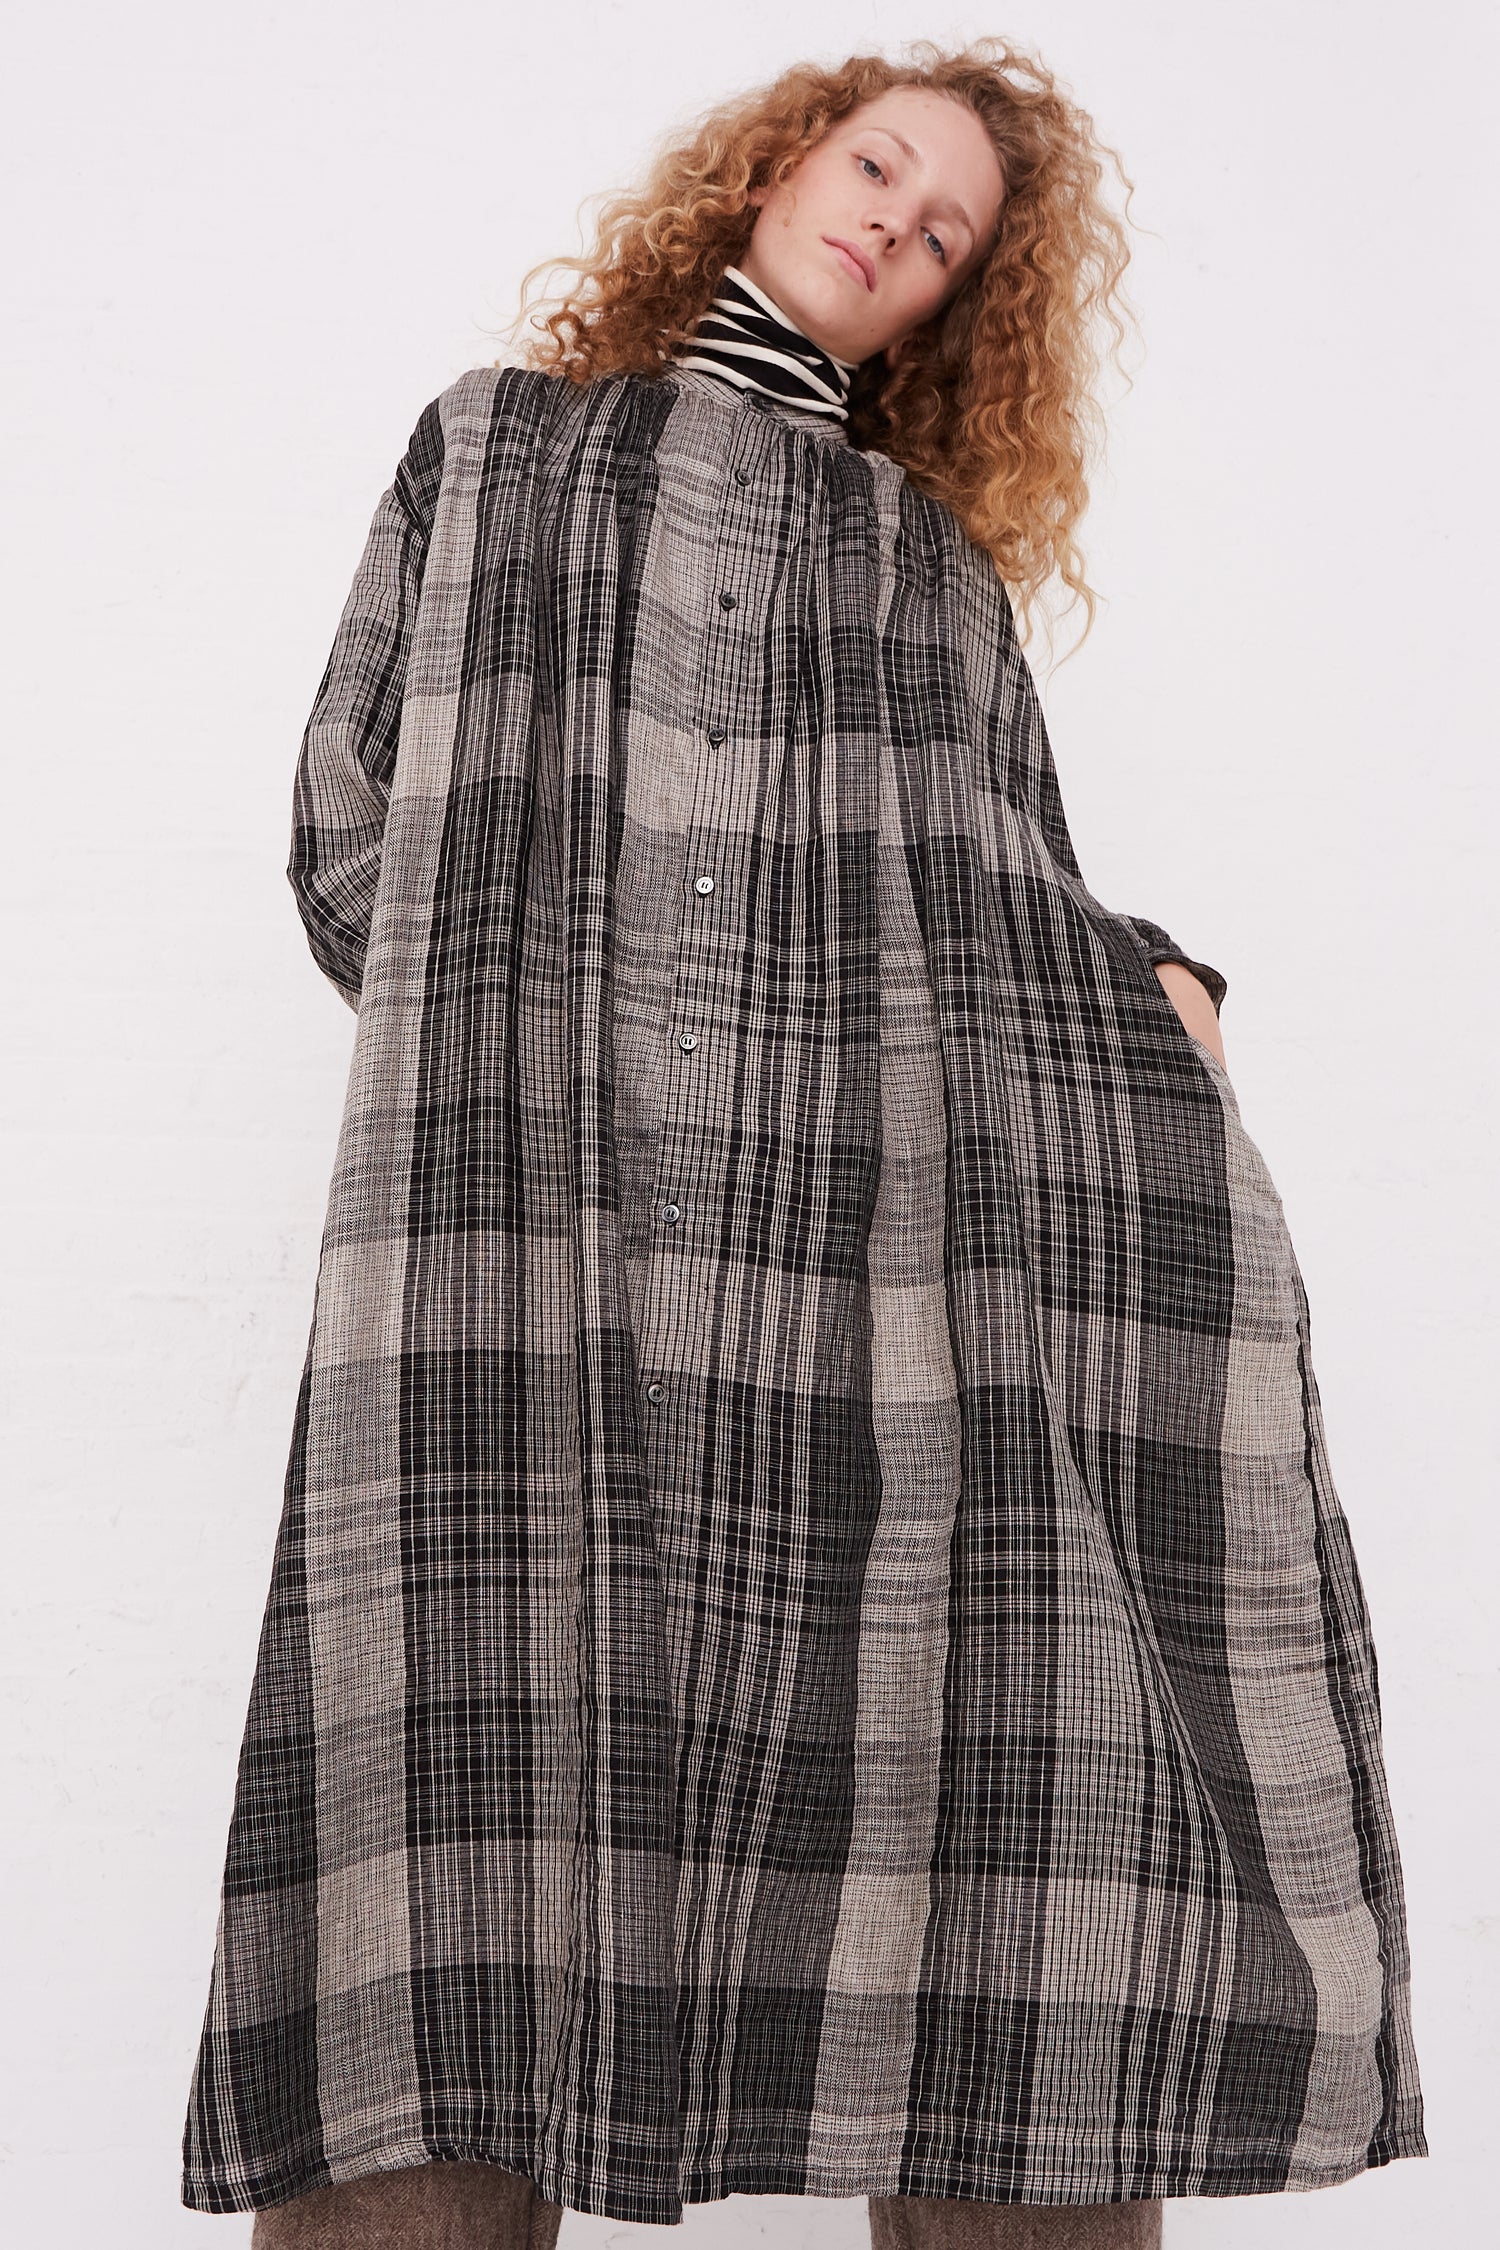 A model wearing the Ichi Antiquités Linen Big Check Dress, available at Oroboro store in NYC.